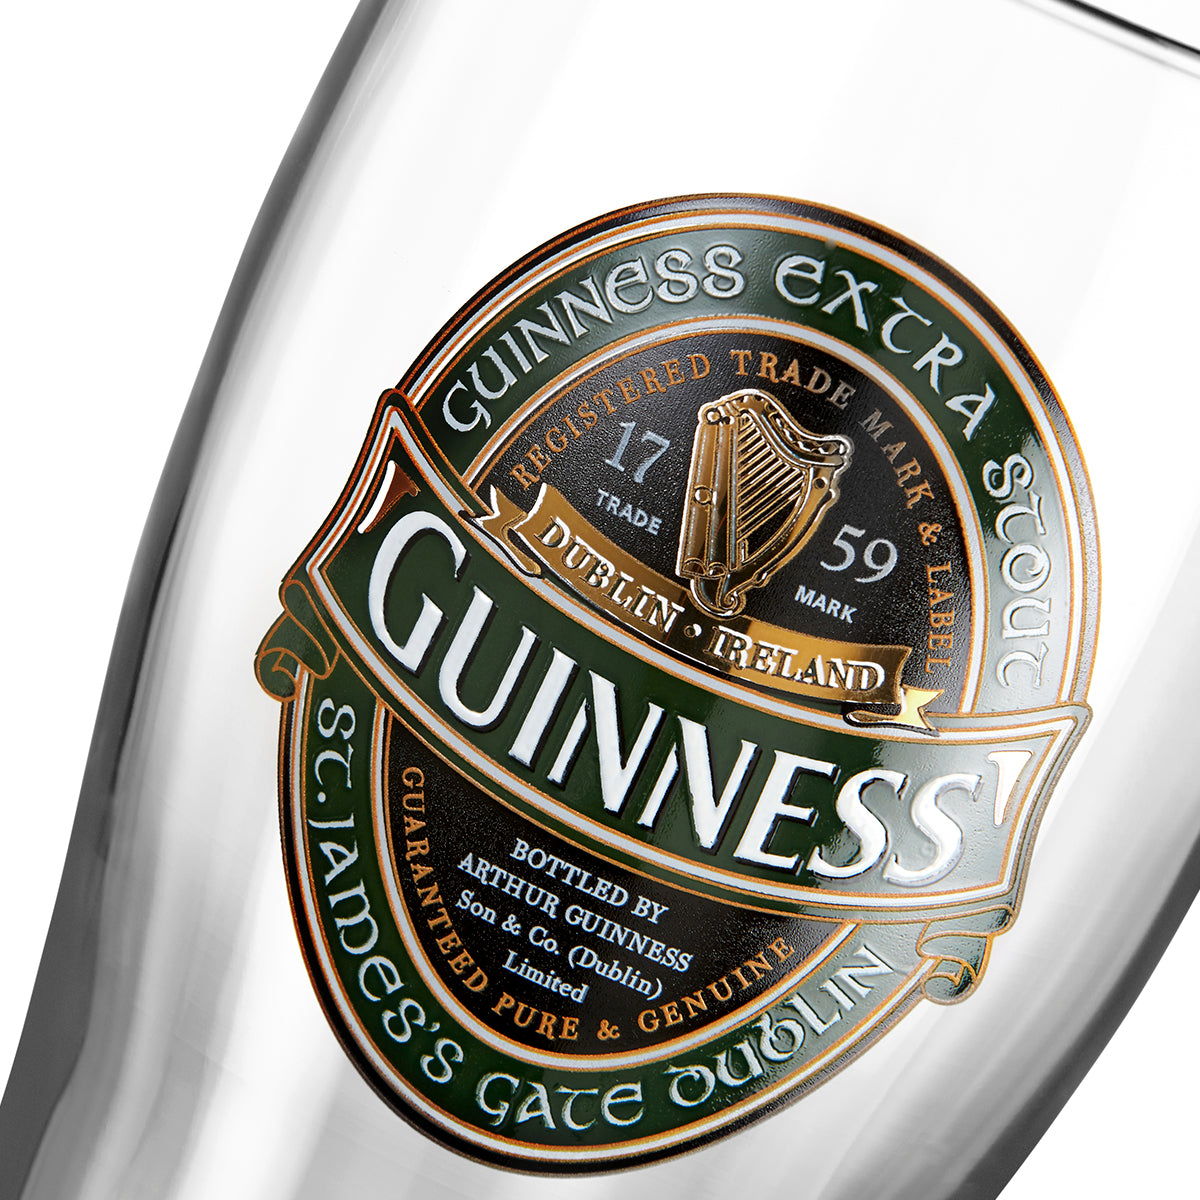 An Guinness Ireland Collection pint glass featuring Guinness UK, on a white background.